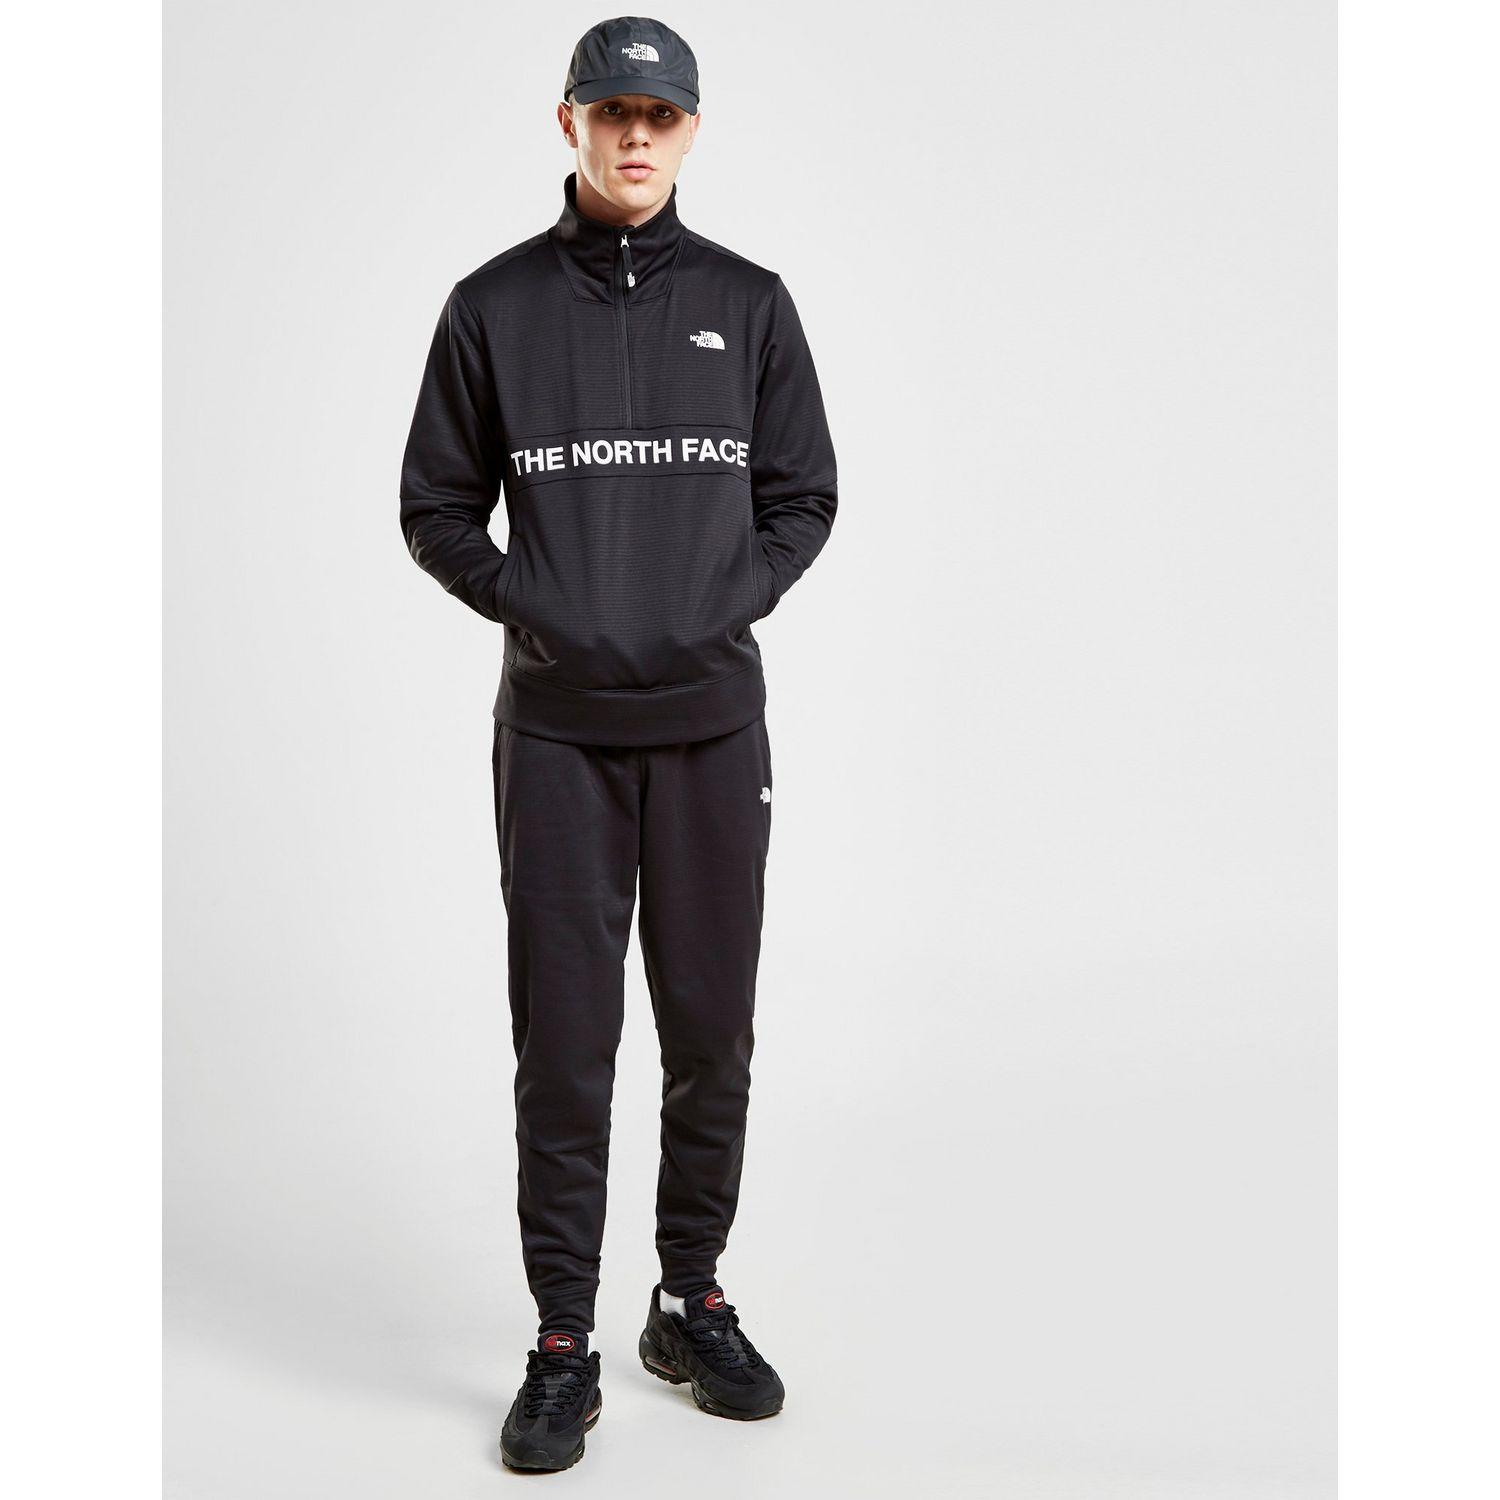 the north face tracksuit top Online 